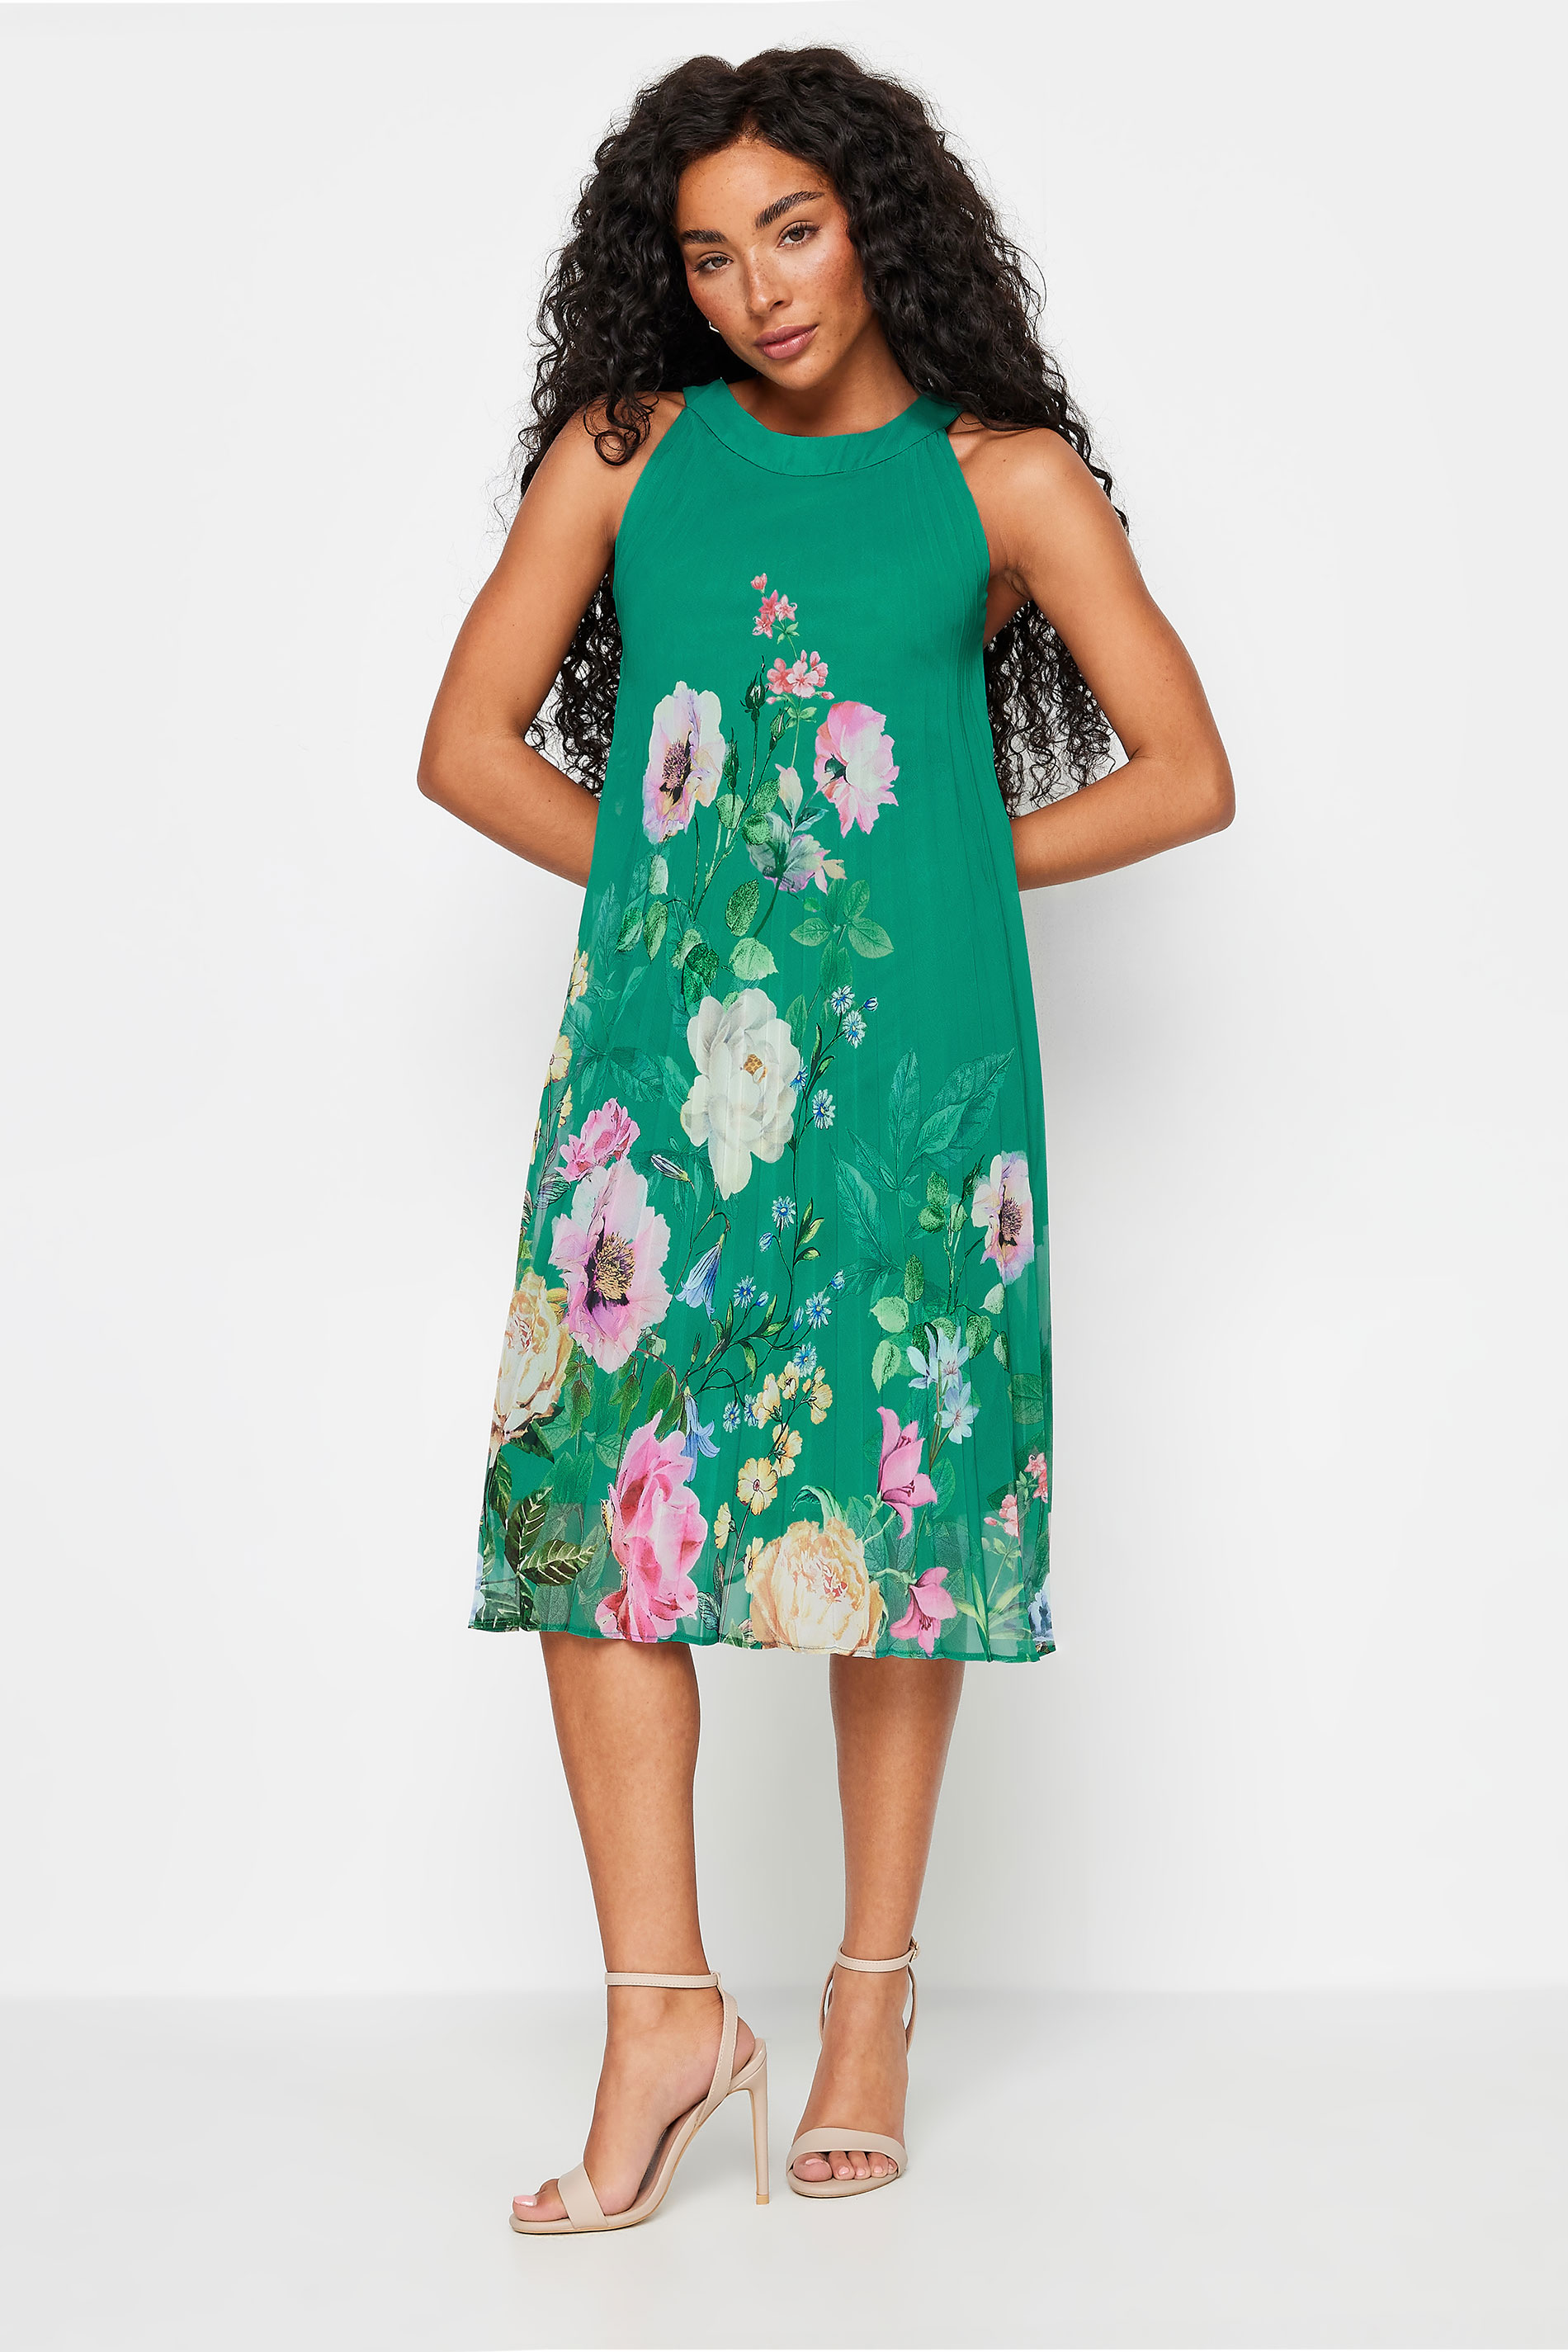 M&Co Petite Green Floral Print Pleated Dress | M&Co 1